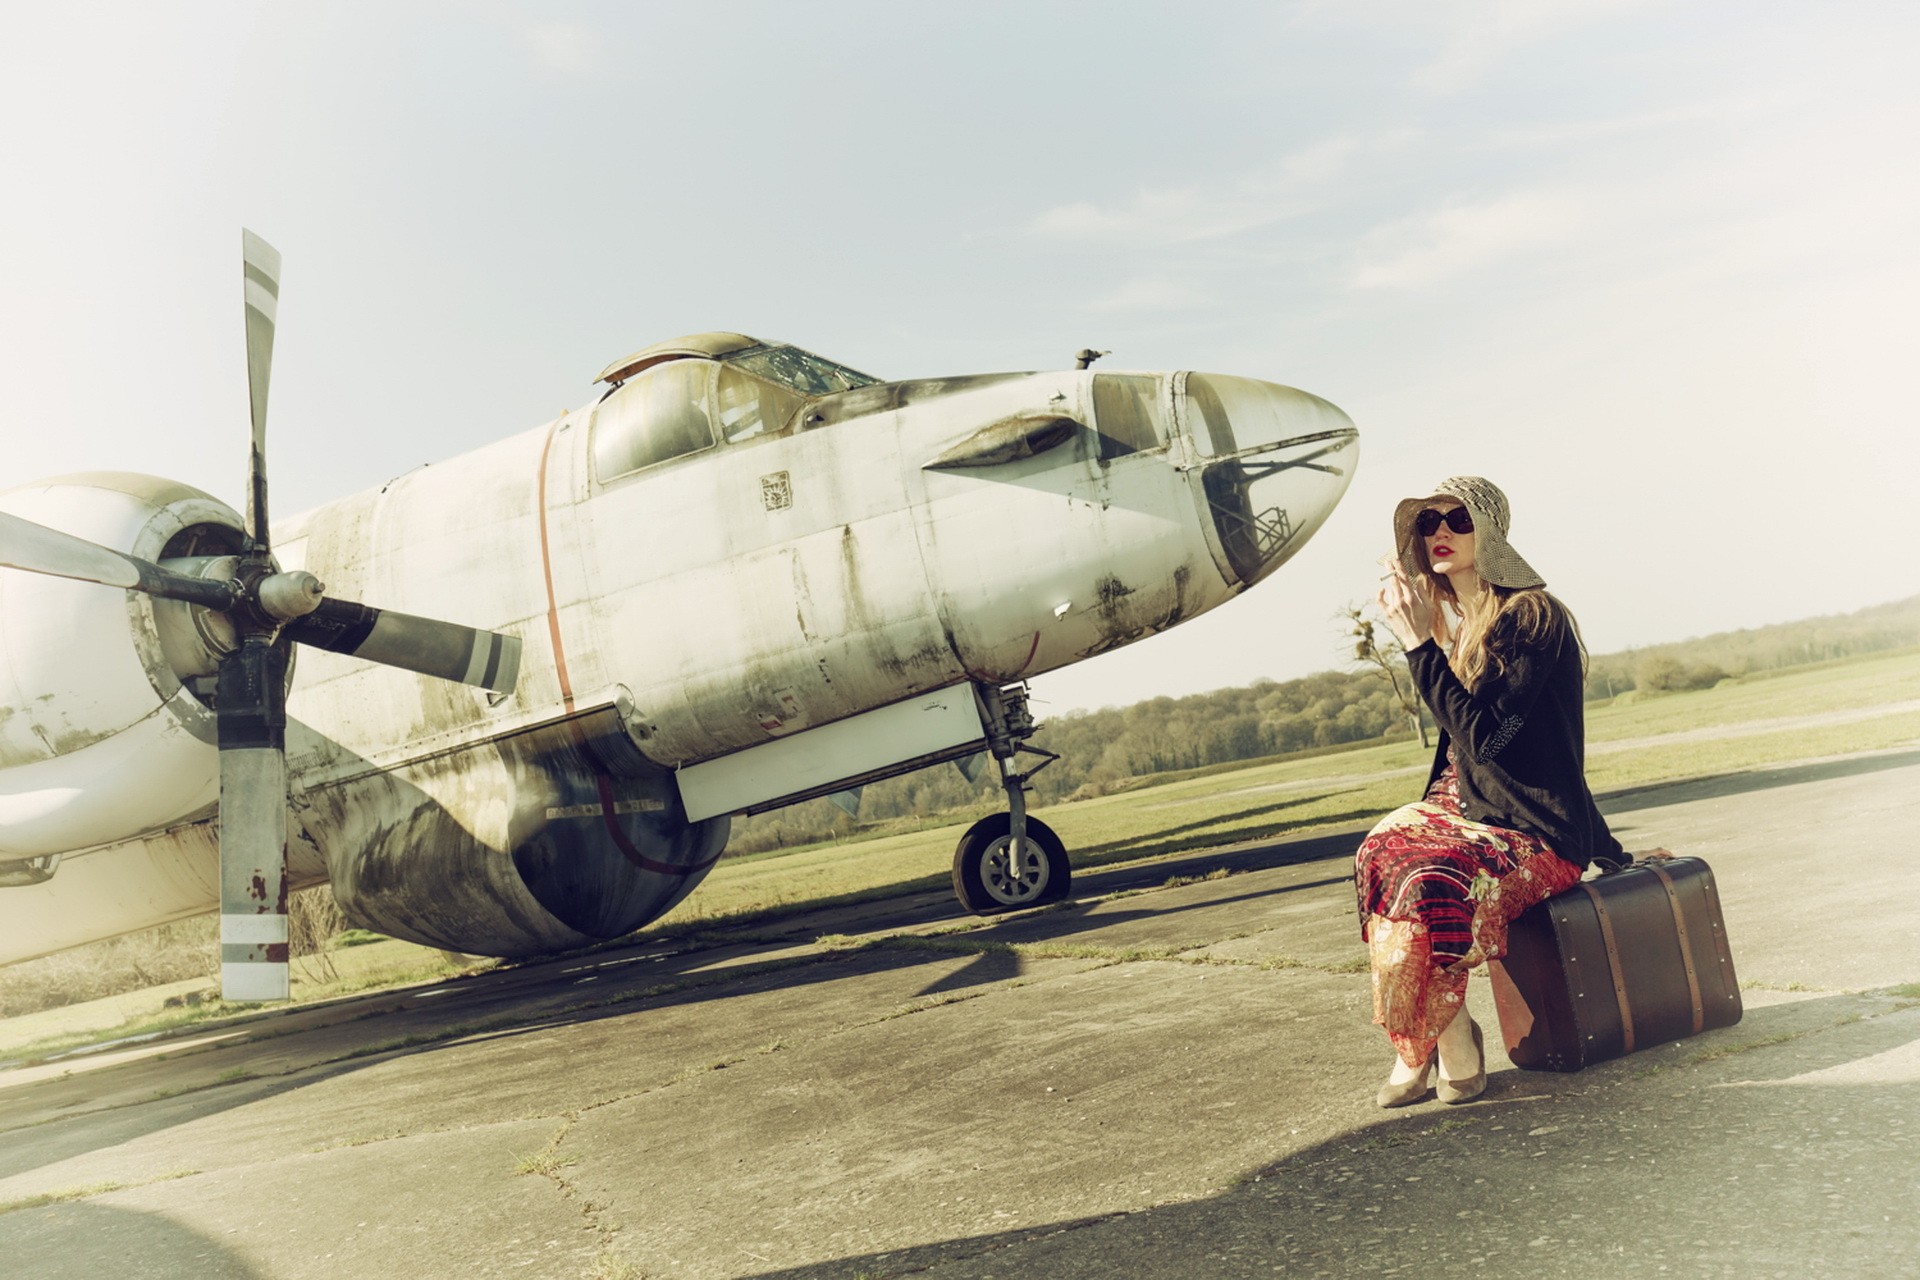 People 1920x1280 aircraft women women outdoors sitting vehicle women with planes women with shades sunglasses suitcase women with hats model propeller